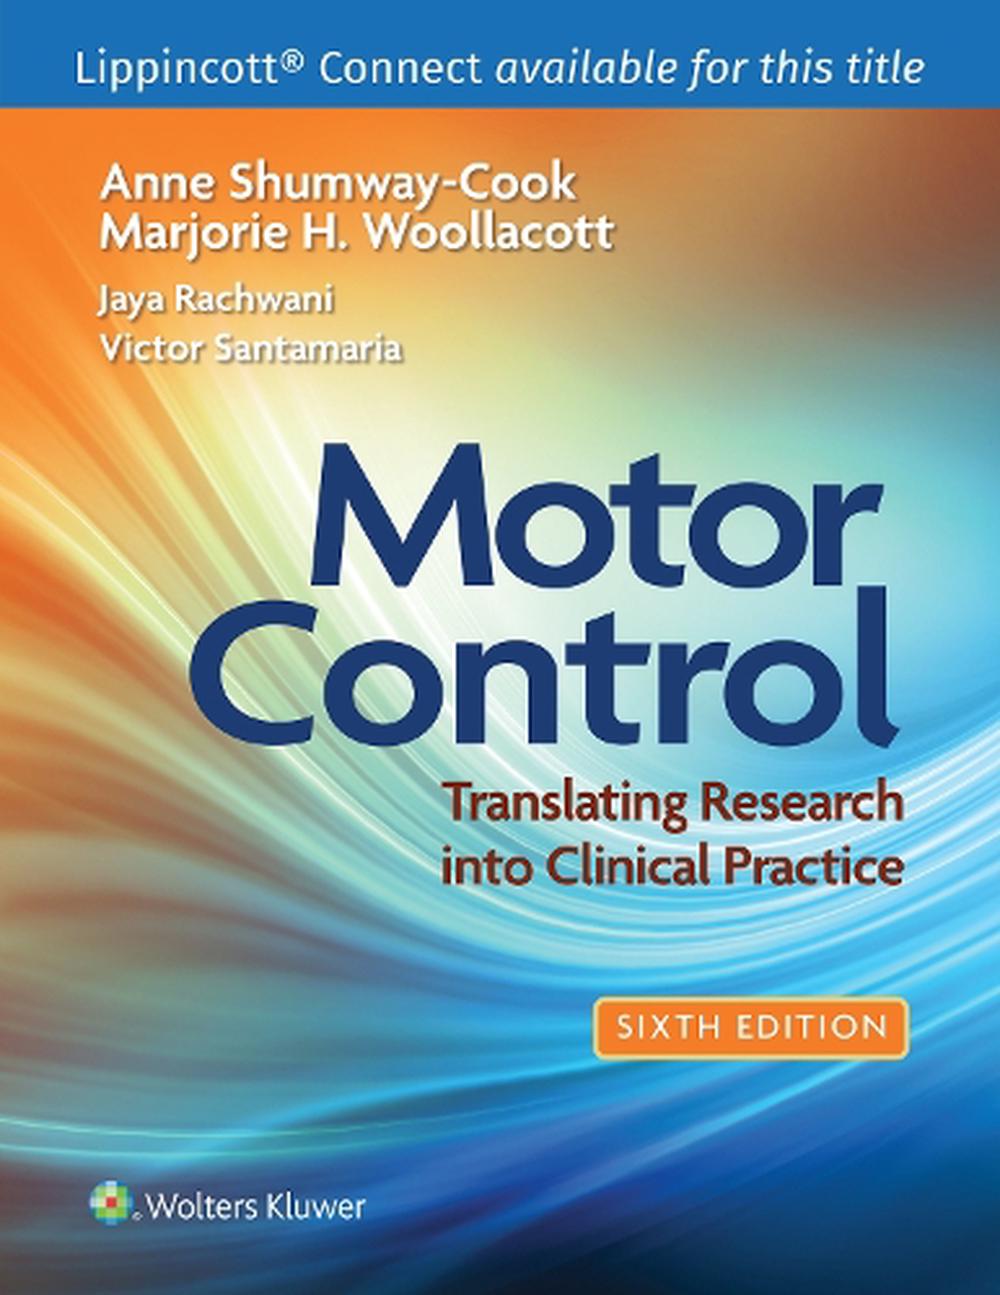 Print　Motor　9781975209681　and　Translating　Control:　6e　Paperback,　Nile　Package　Lippincott　Clinical　Book　Digital　Research　at　into　by　Connect　Card　Buy　online　The　Anne　Access　Practice　Shumway-Cook,